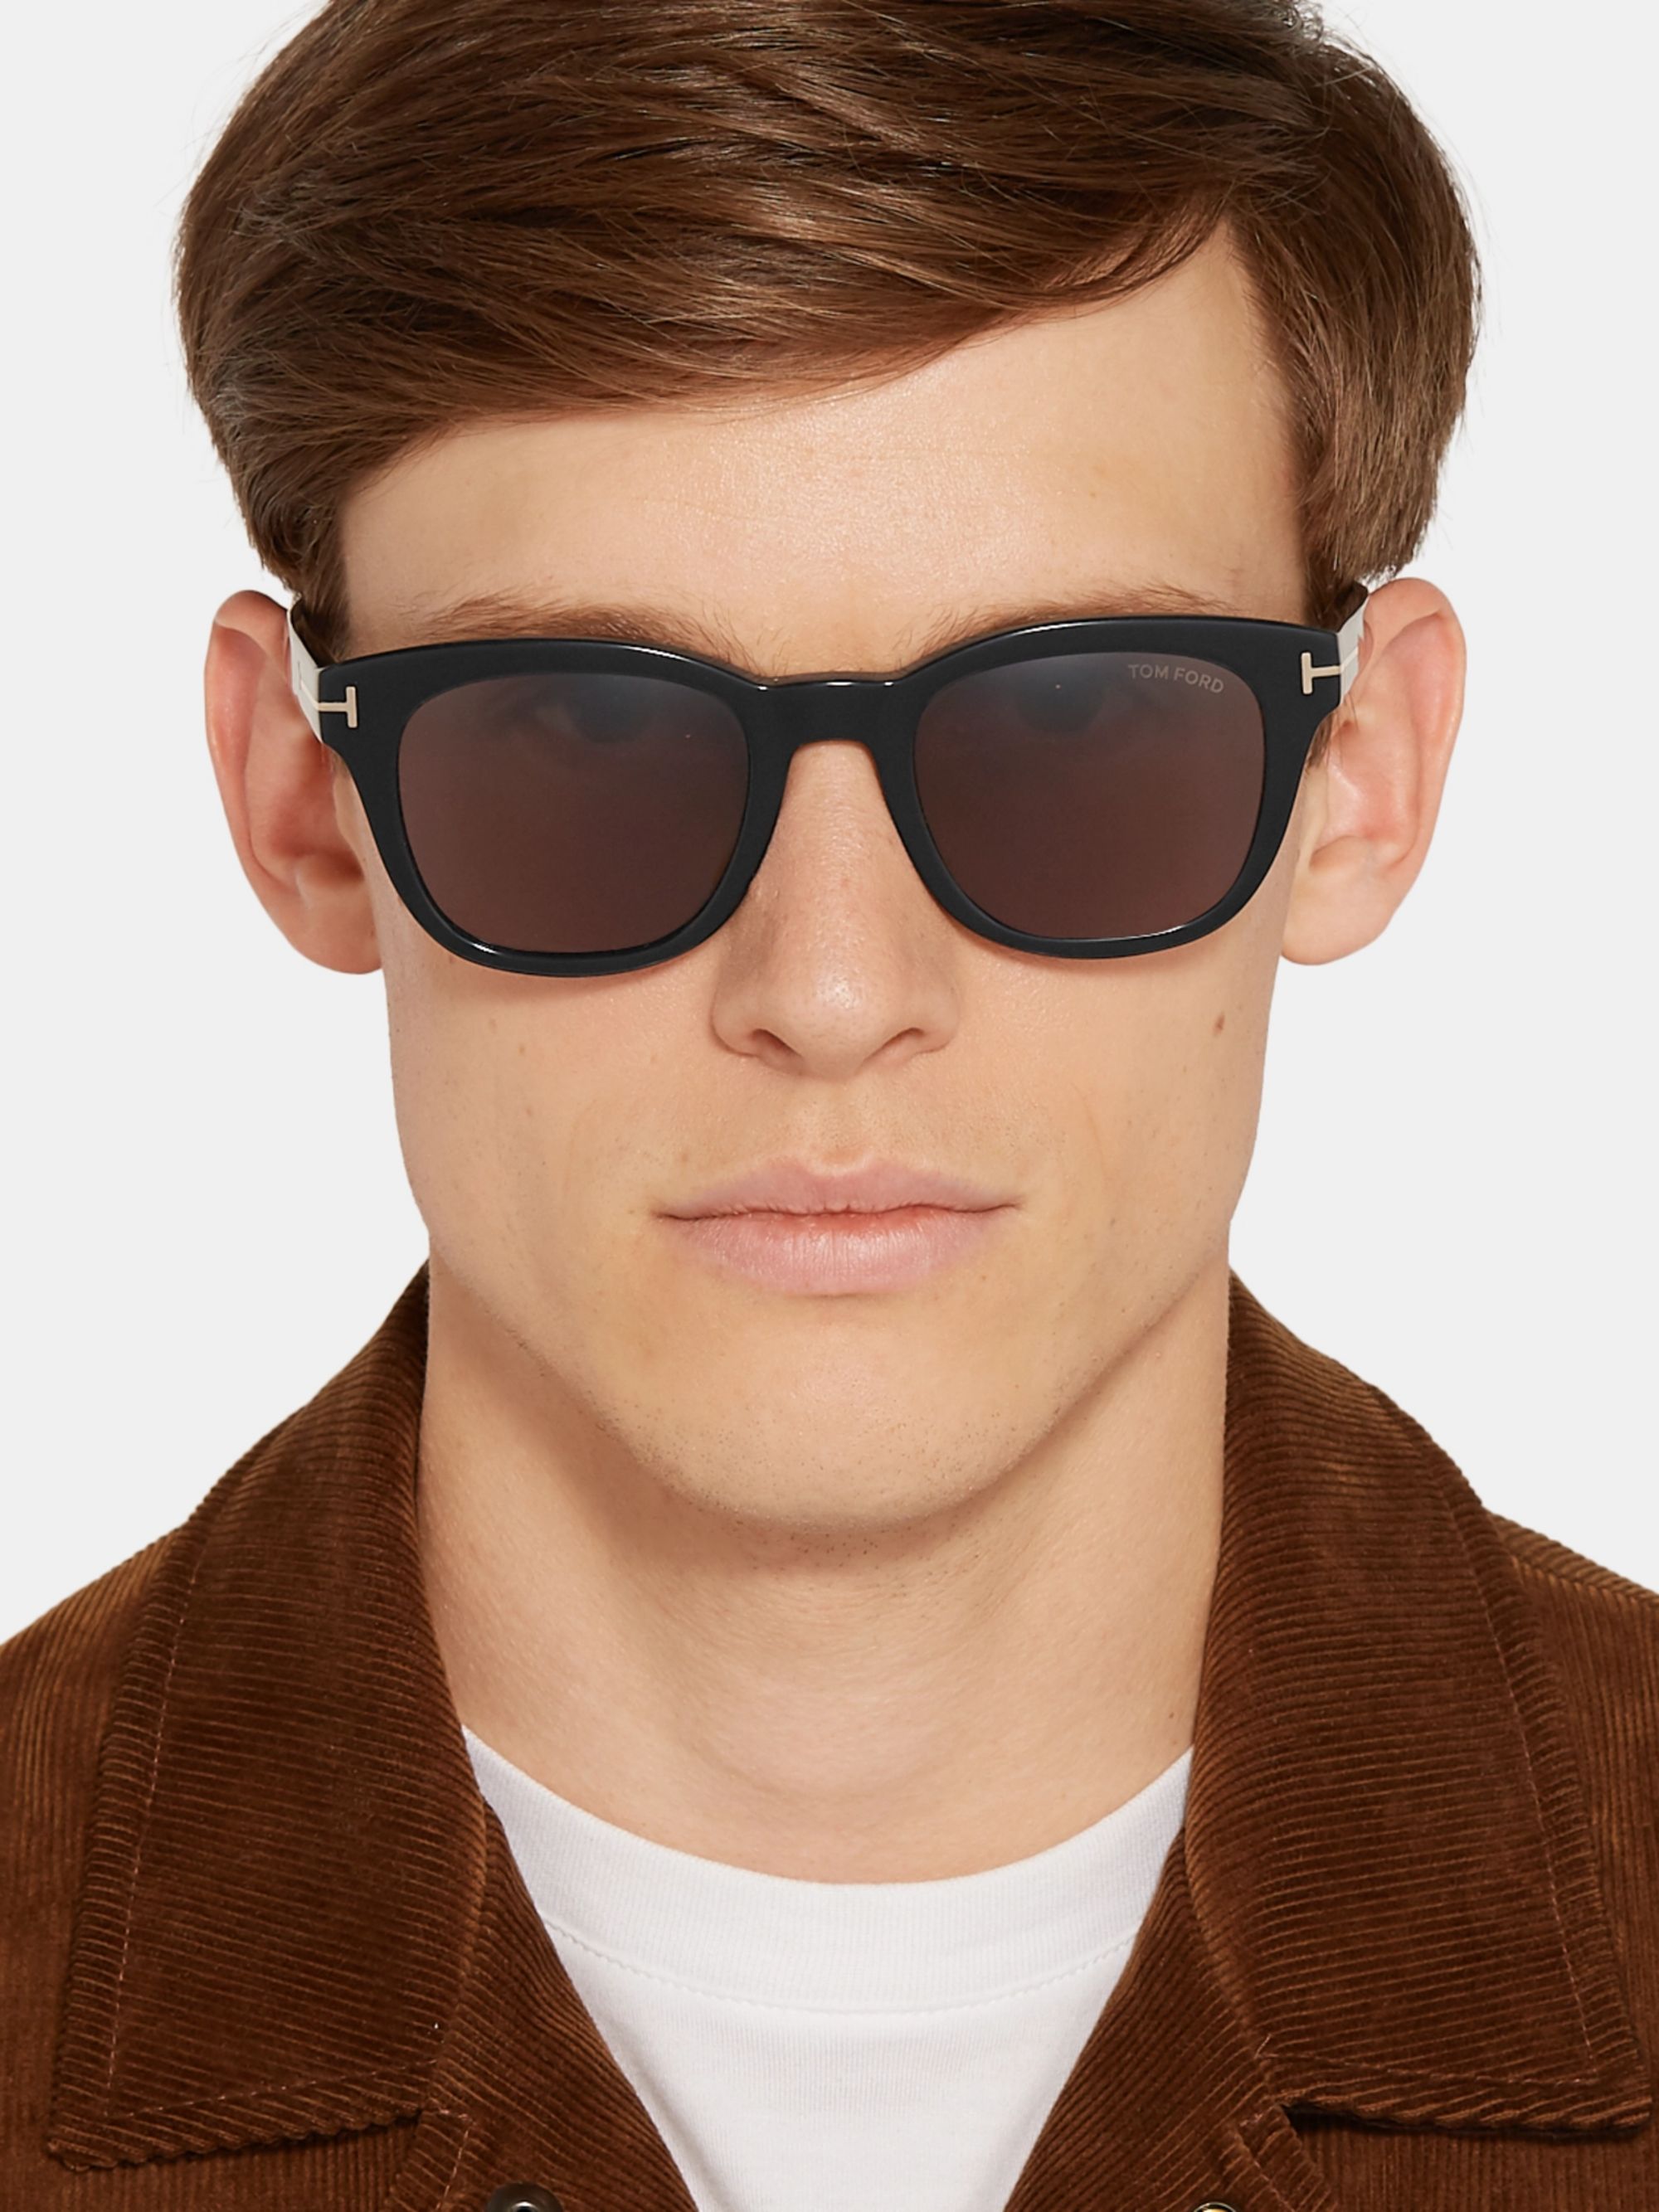 Tom Ford Sunglasses On Face Factory Sale, UP TO 70% OFF | www 